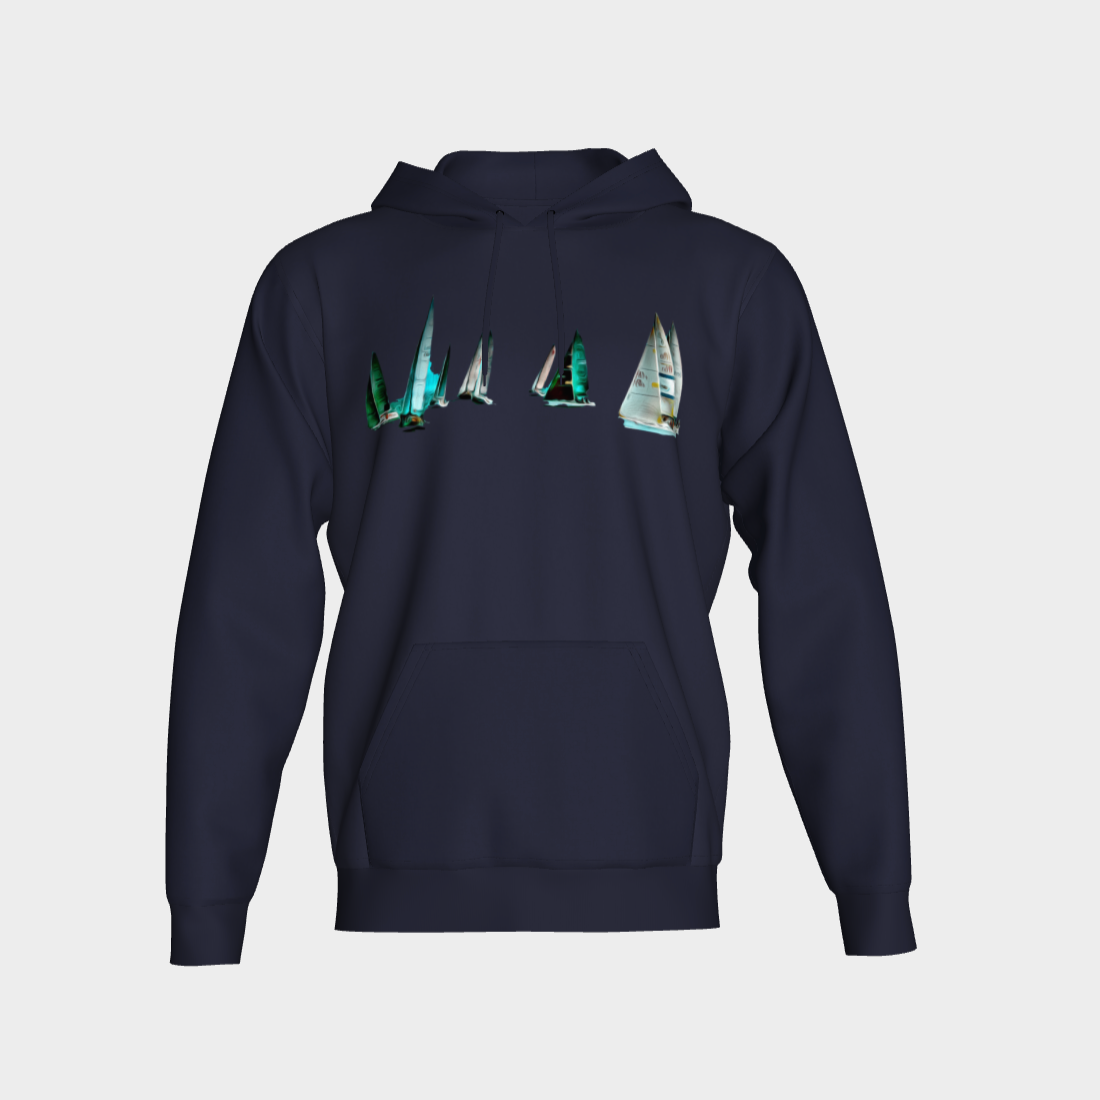 Sail Away Unisex Pullover Hoodie Your Van Isle Goddess unisex pullover hoodie is a great classic hoodie!  Created with state of the art tri-tex material which is a non-shrink poly middle encased in two layers of ultra soft cotton face and lining.